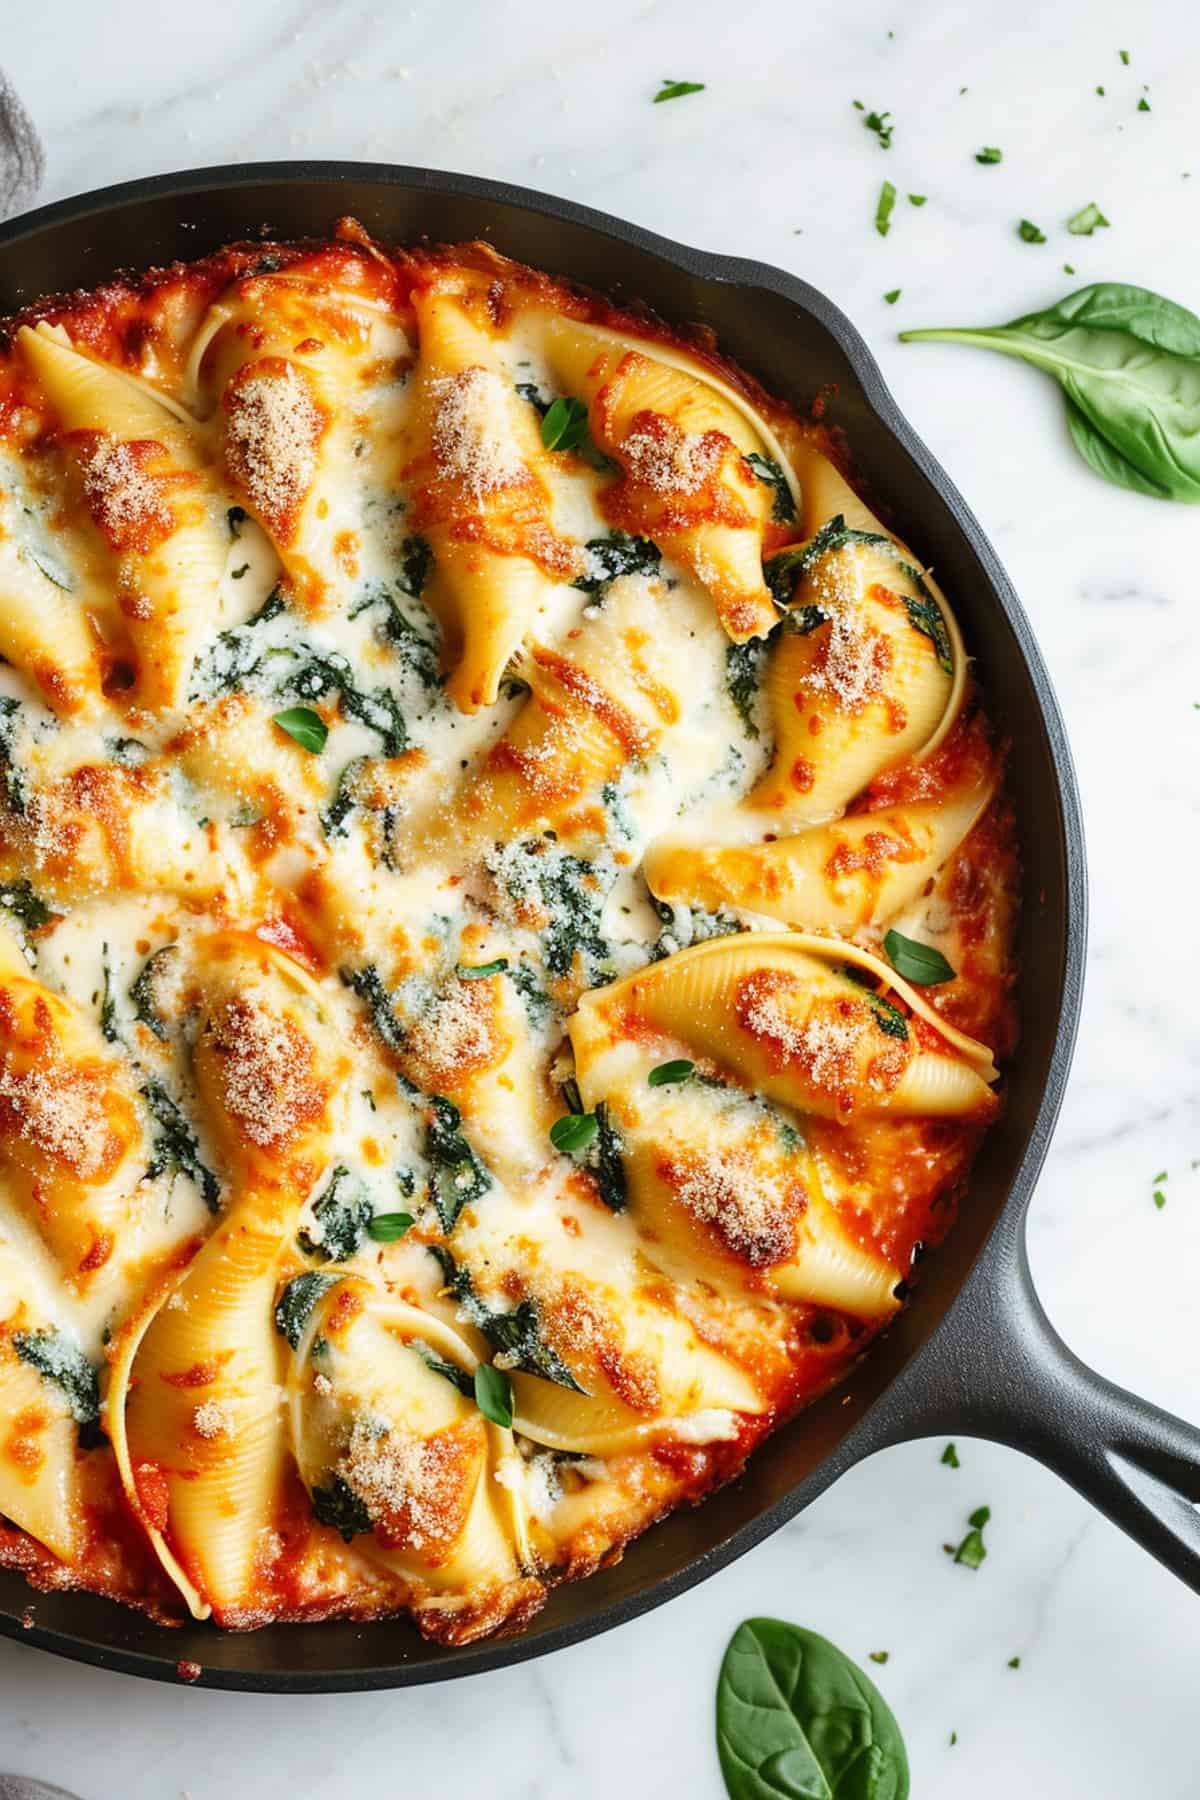 Spinach and ricotta stuffed shells in a skillet baked with cheese.